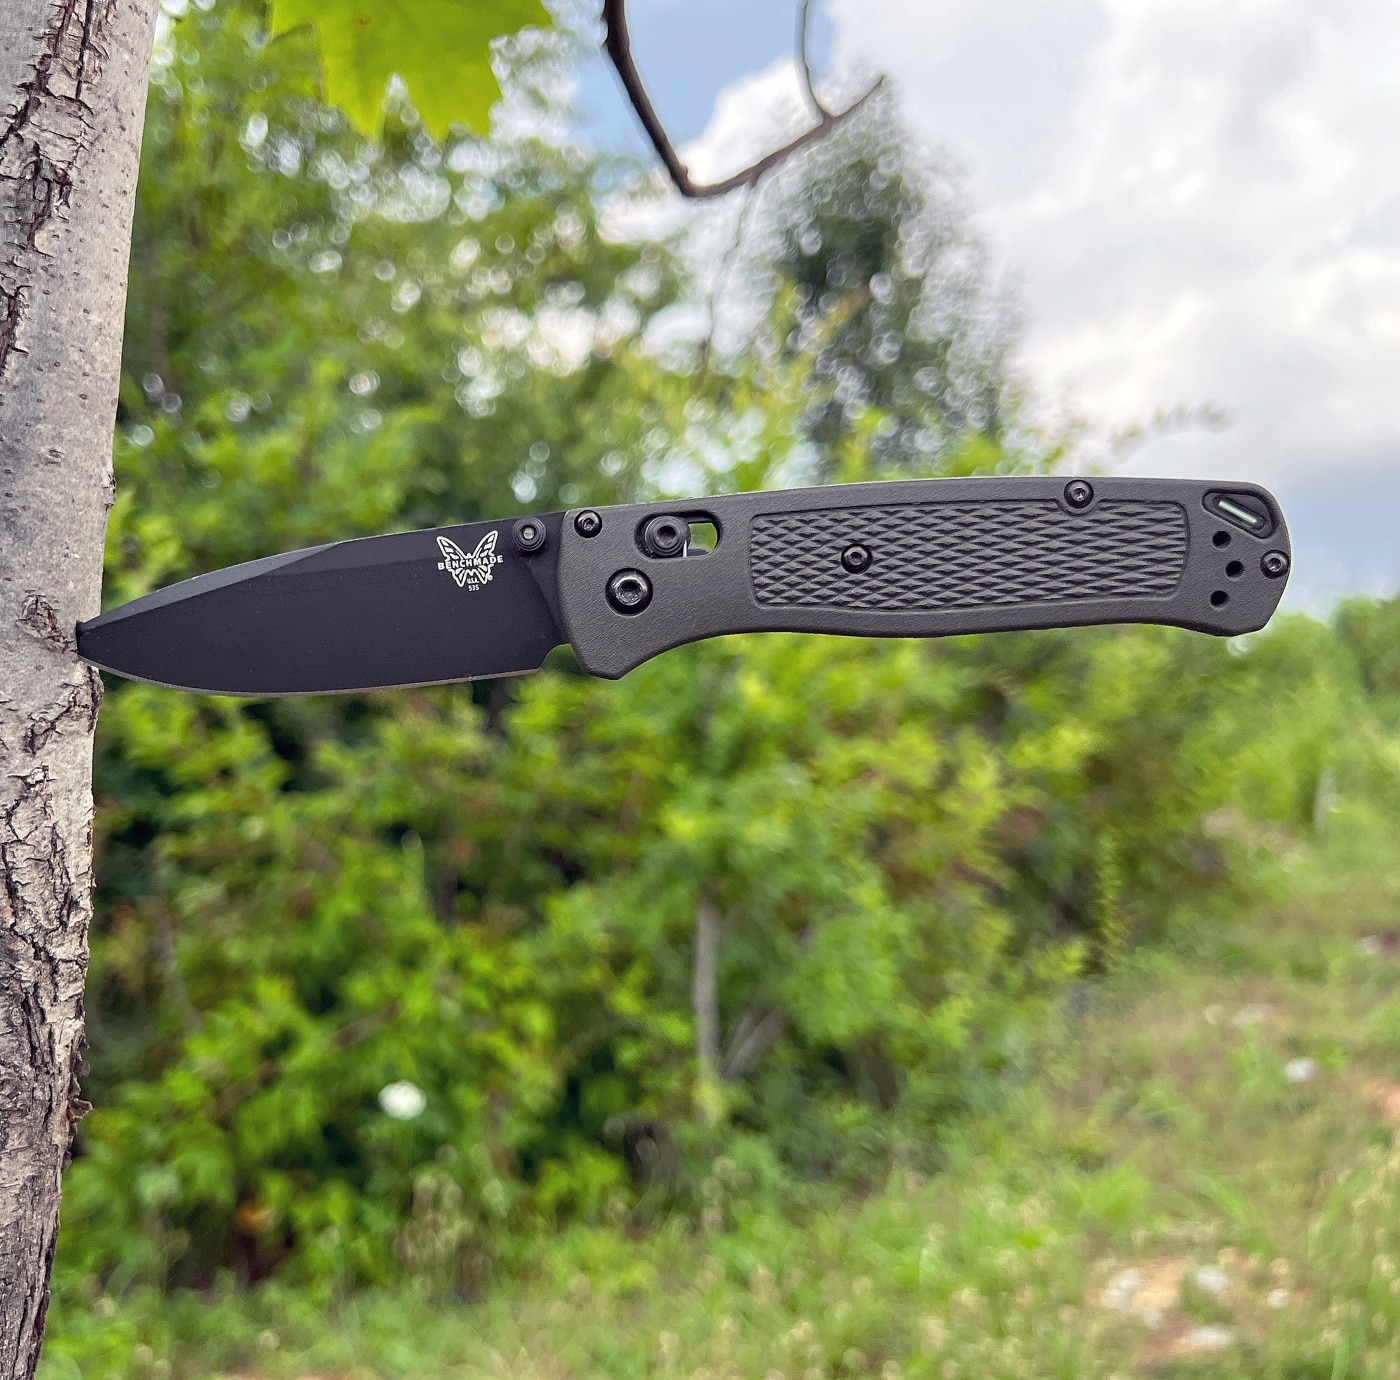 benchmade bugout review knife outdoors hiking camping survival hunting